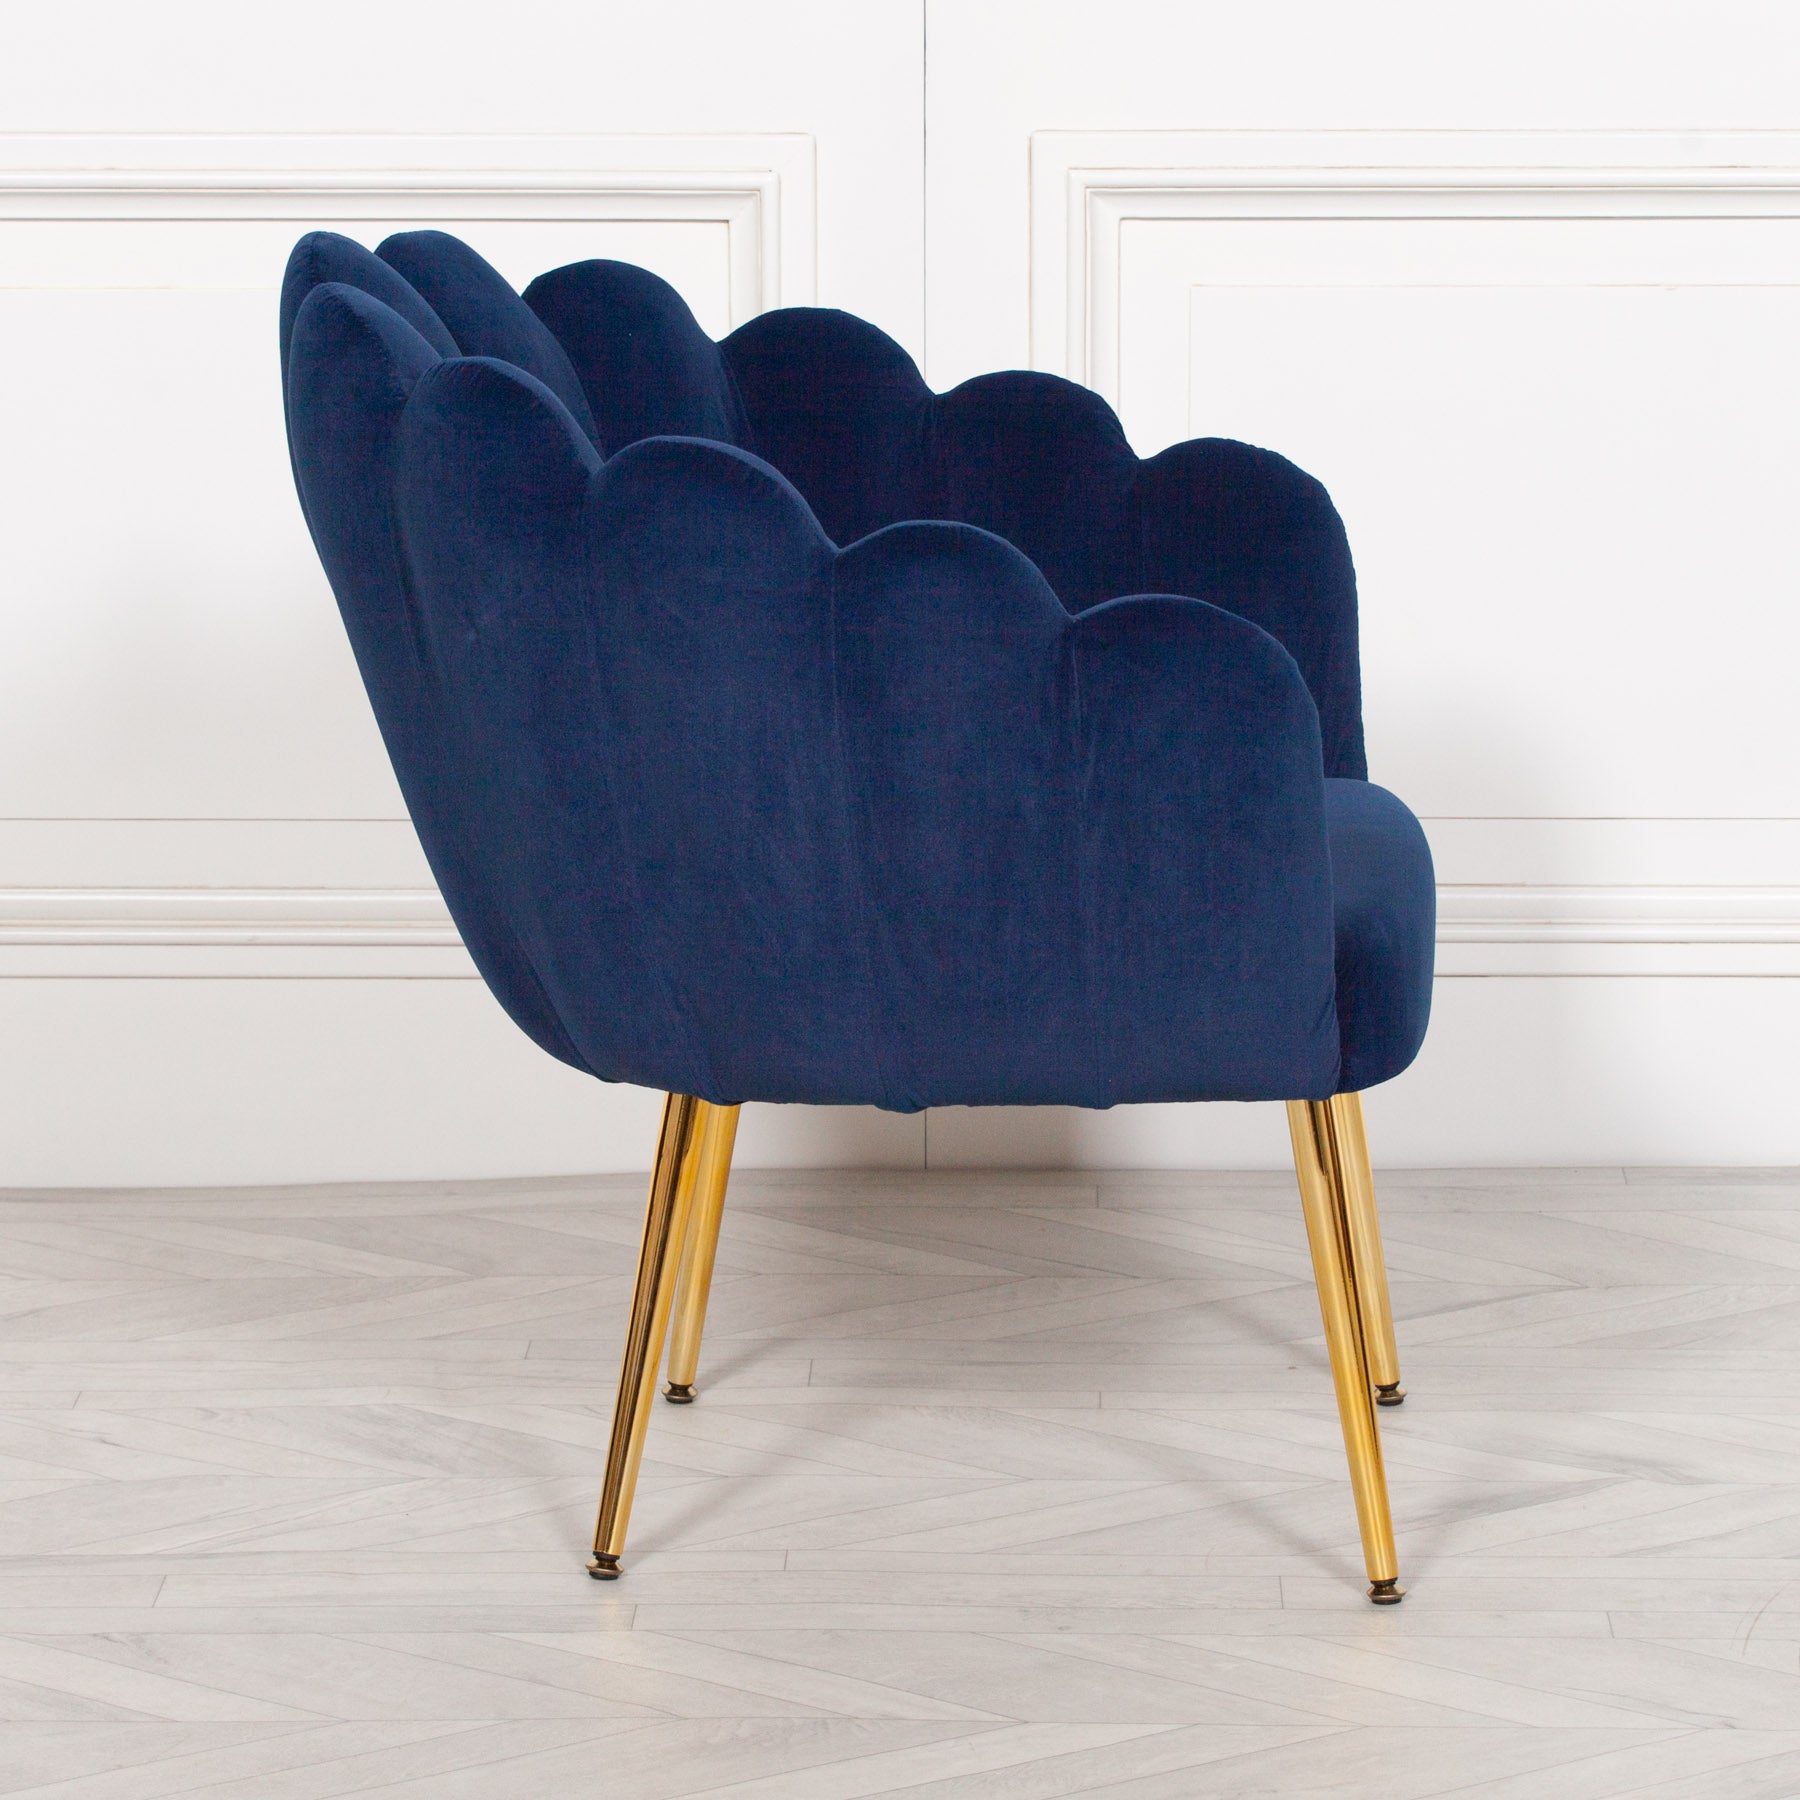 Deco Blue Dining / Bedroom Chair